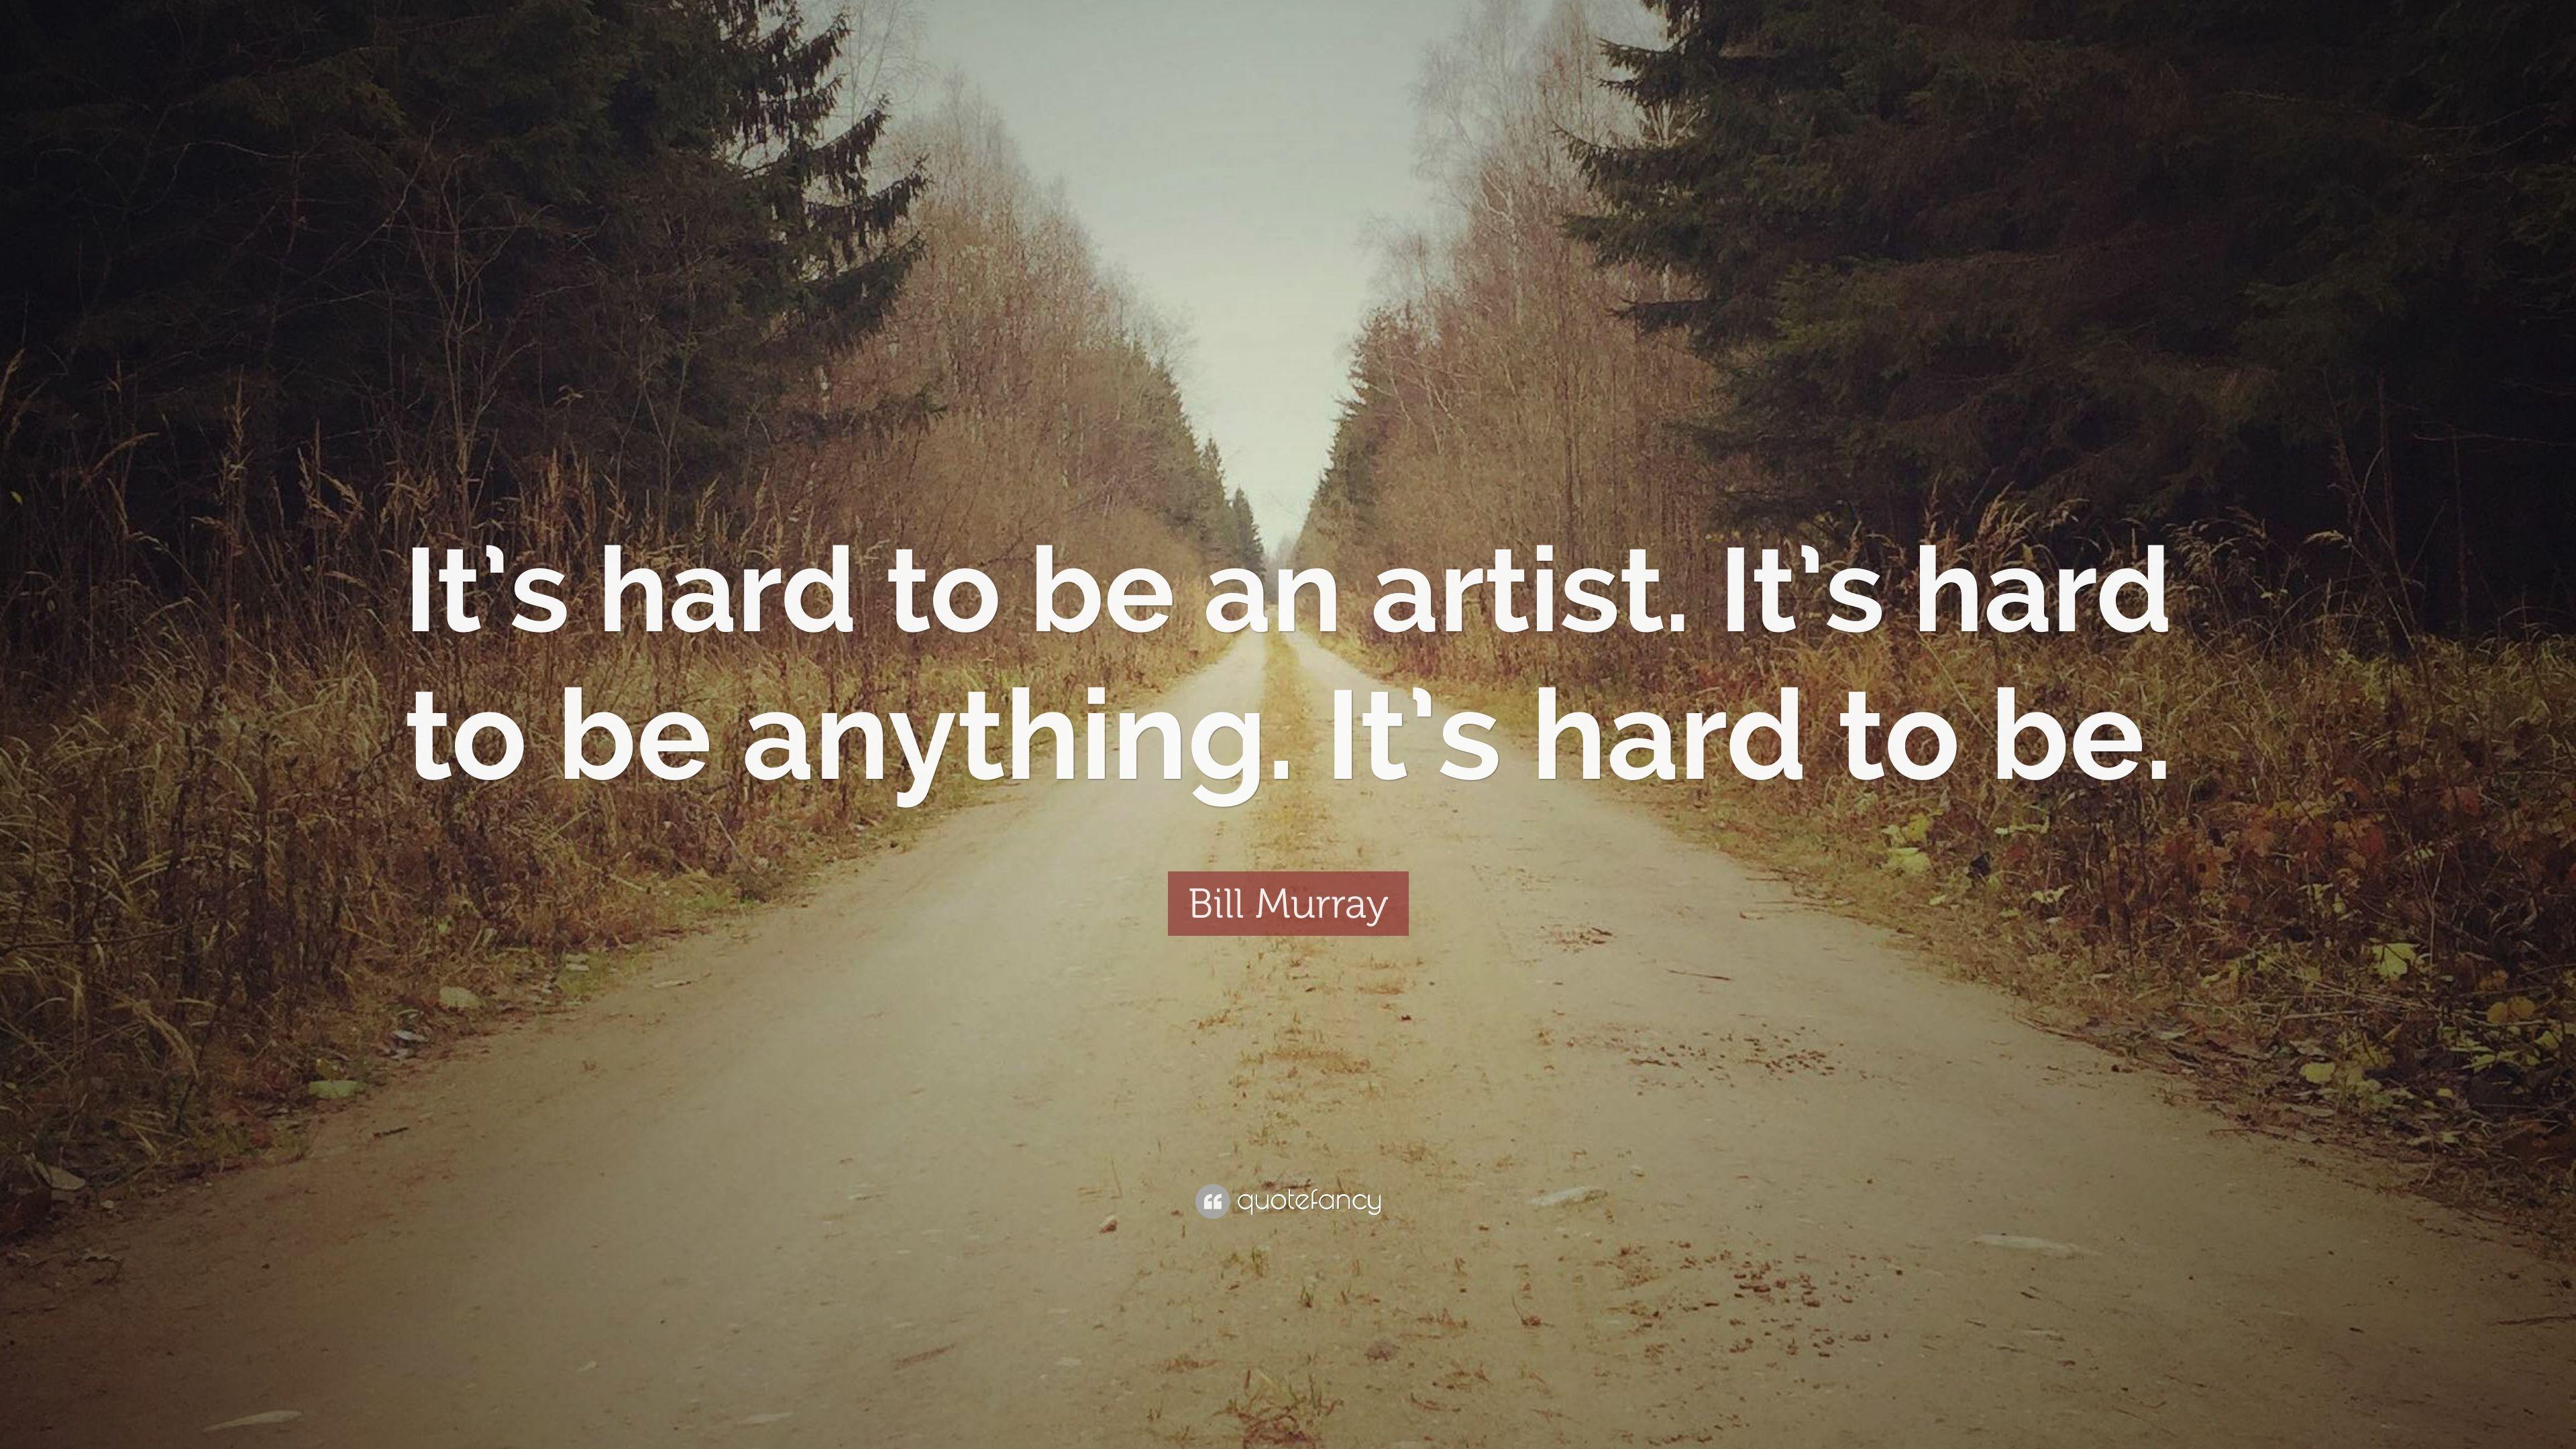 Bill Murray Quote: “It's hard to be an artist. It's hard to be